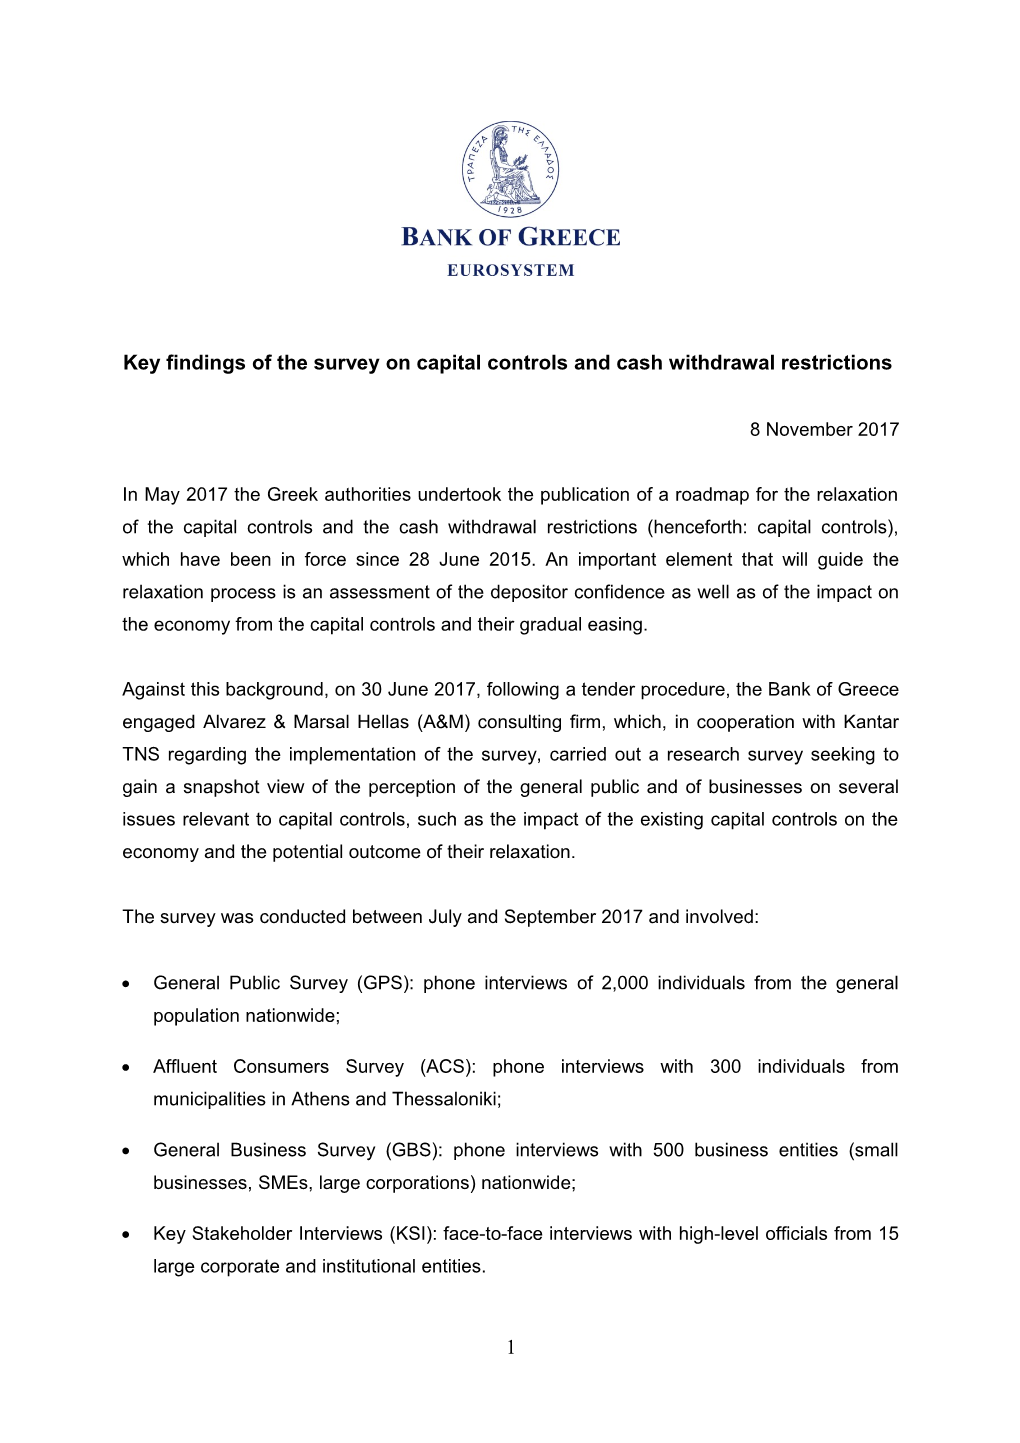 Key Findings of the Survey on Capital Controls and Cash Withdrawal Restrictions